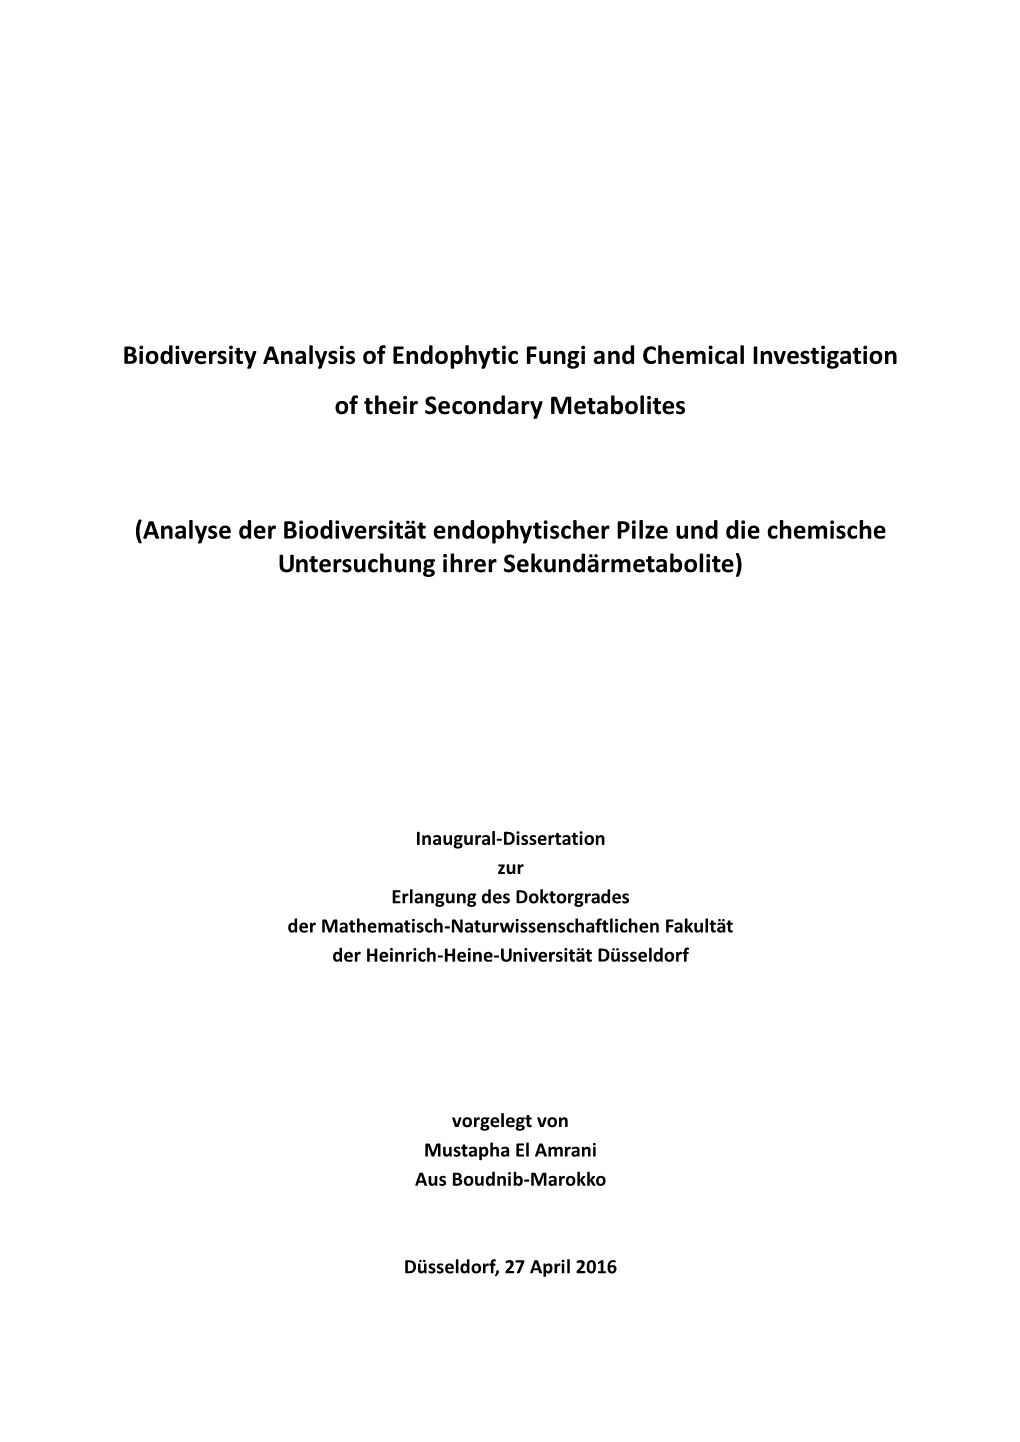 Biodiversity Analysis of Endophytic Fungi and Chemical Investigation of Their Secondary Metabolites